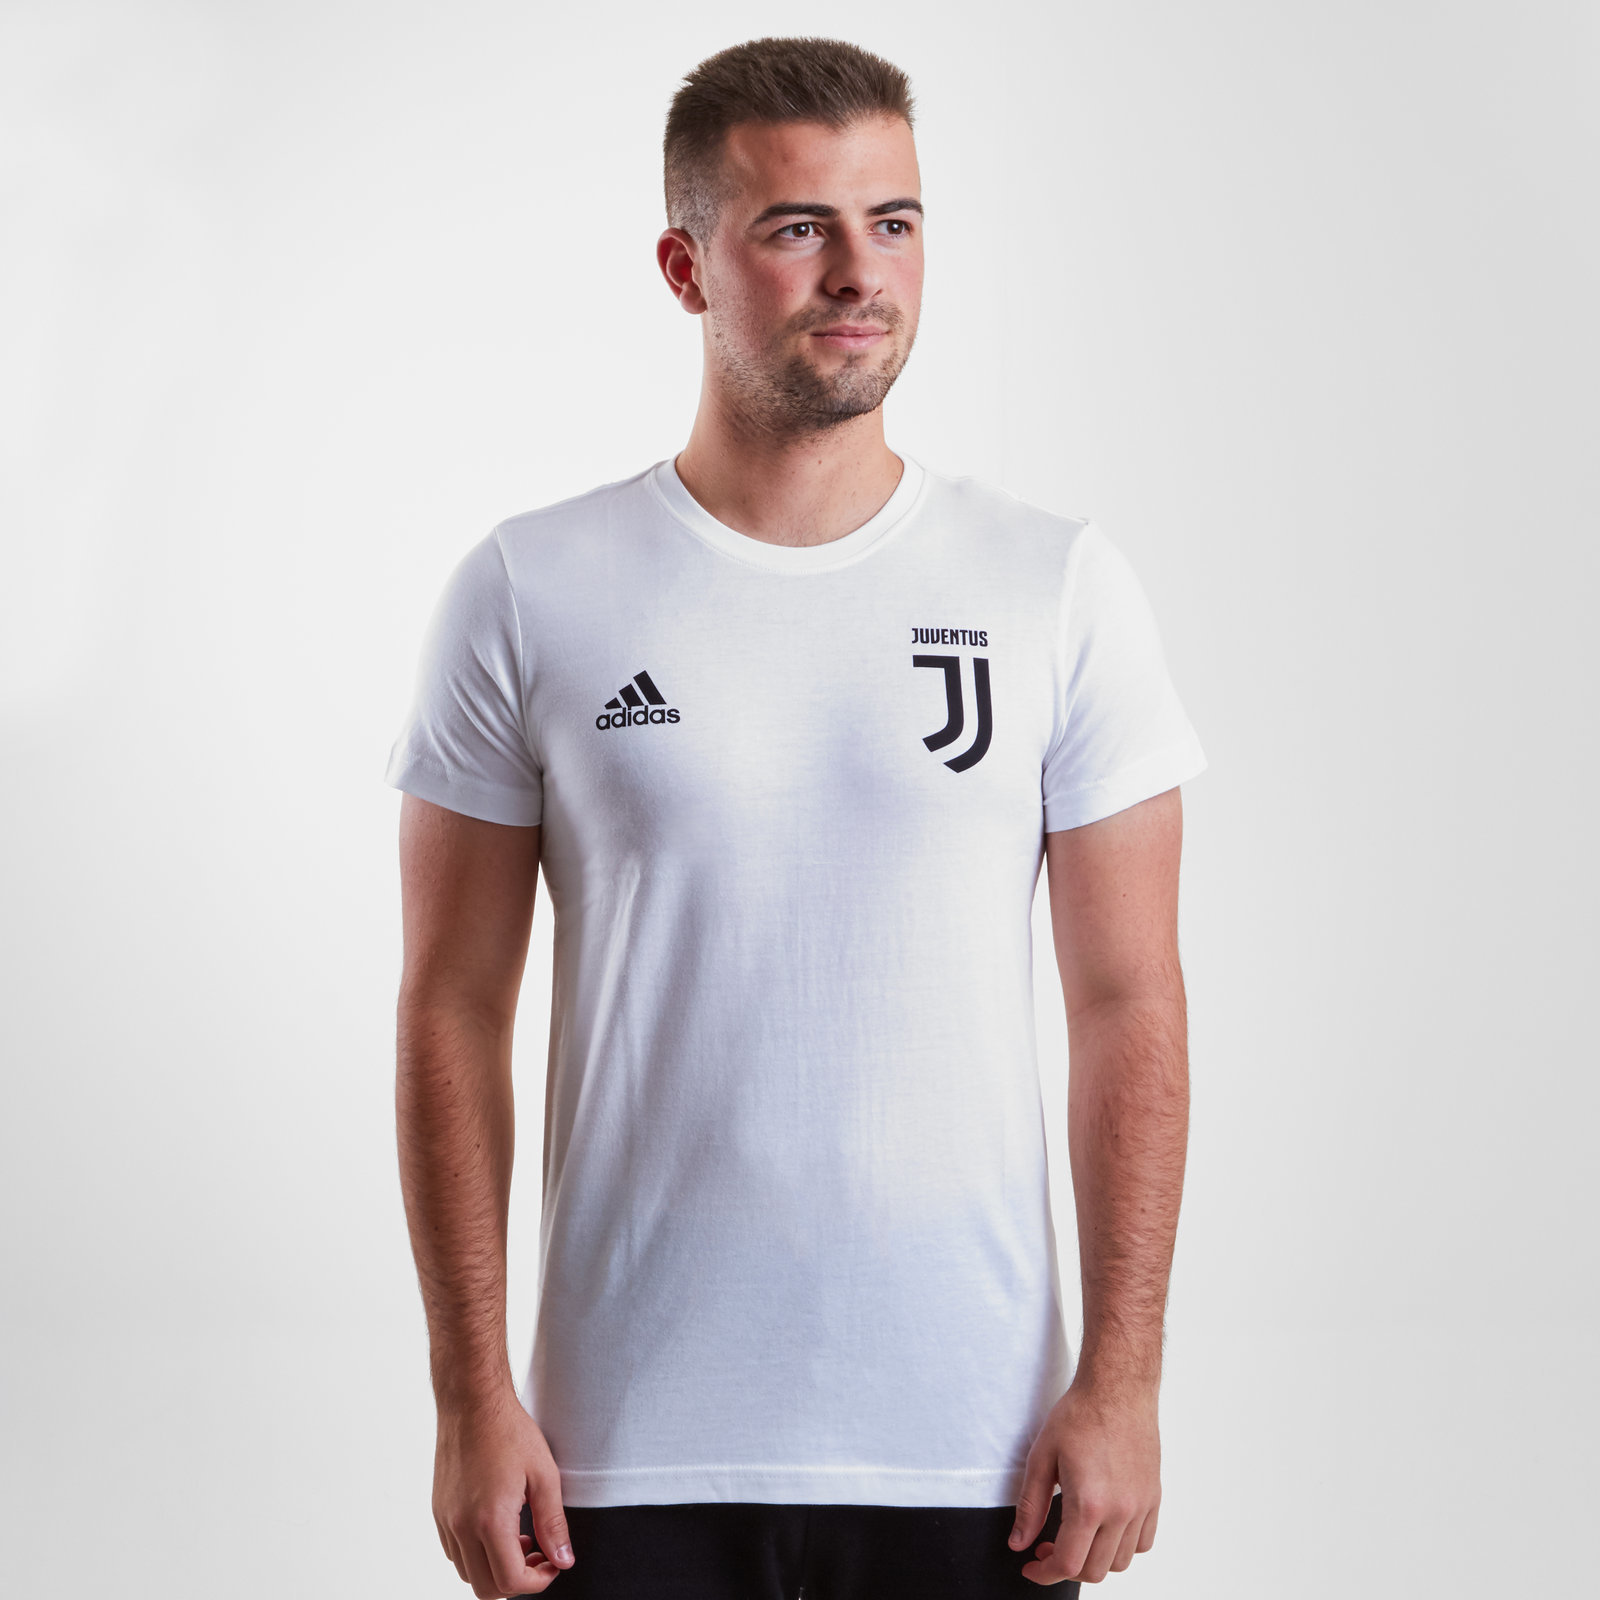 Details About Adidas Mens Juventus Turin Graphic Football T Shirt Tee Top White